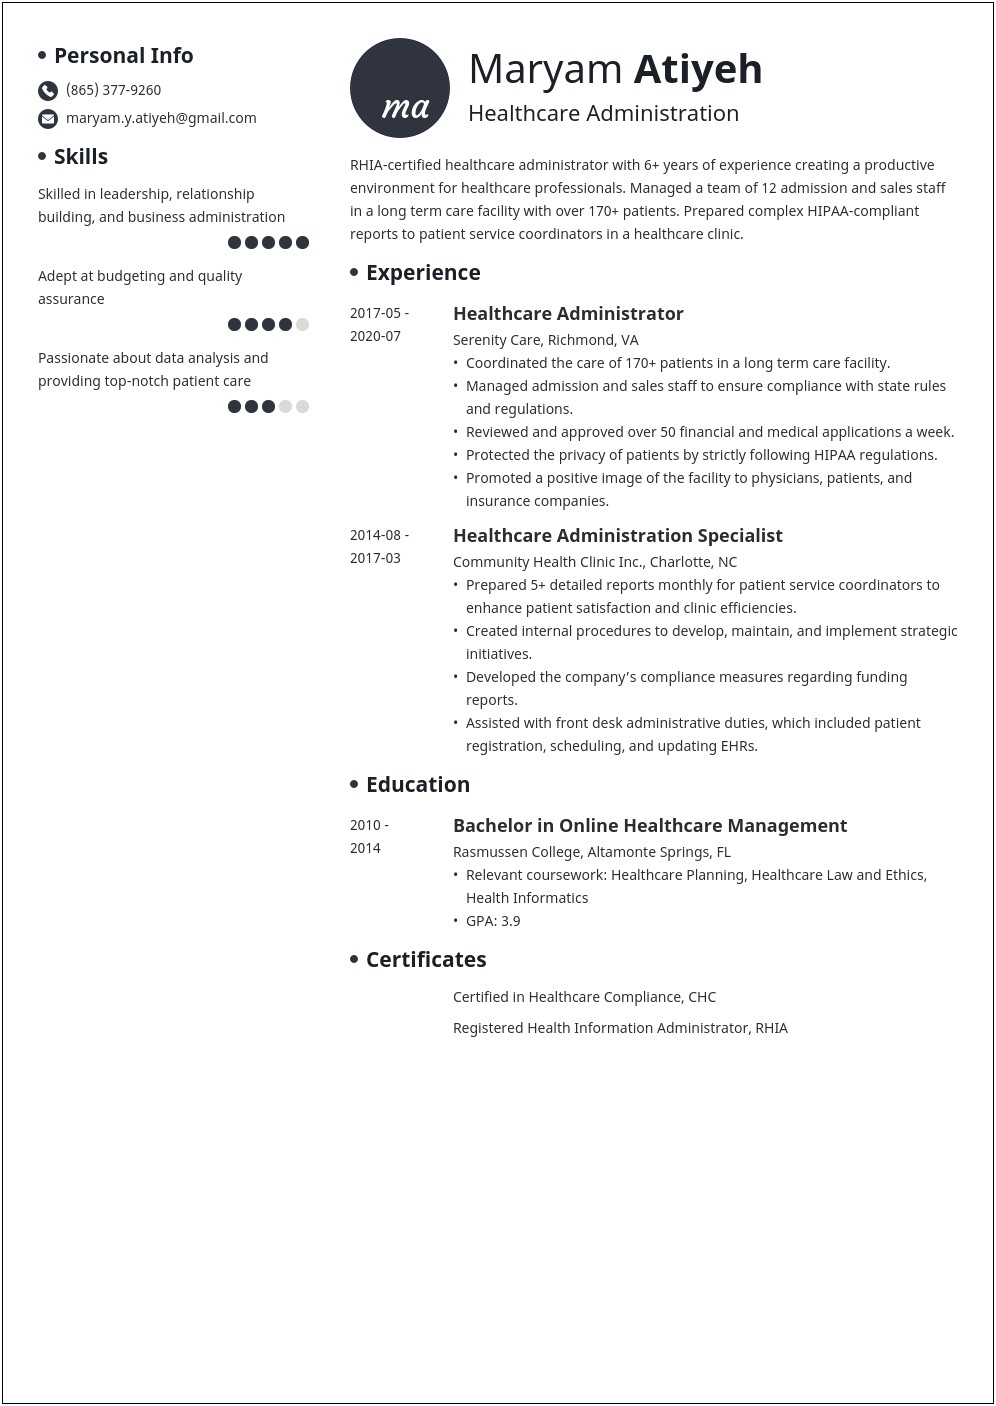 Resume Objective Entry Level Healthcare 2017